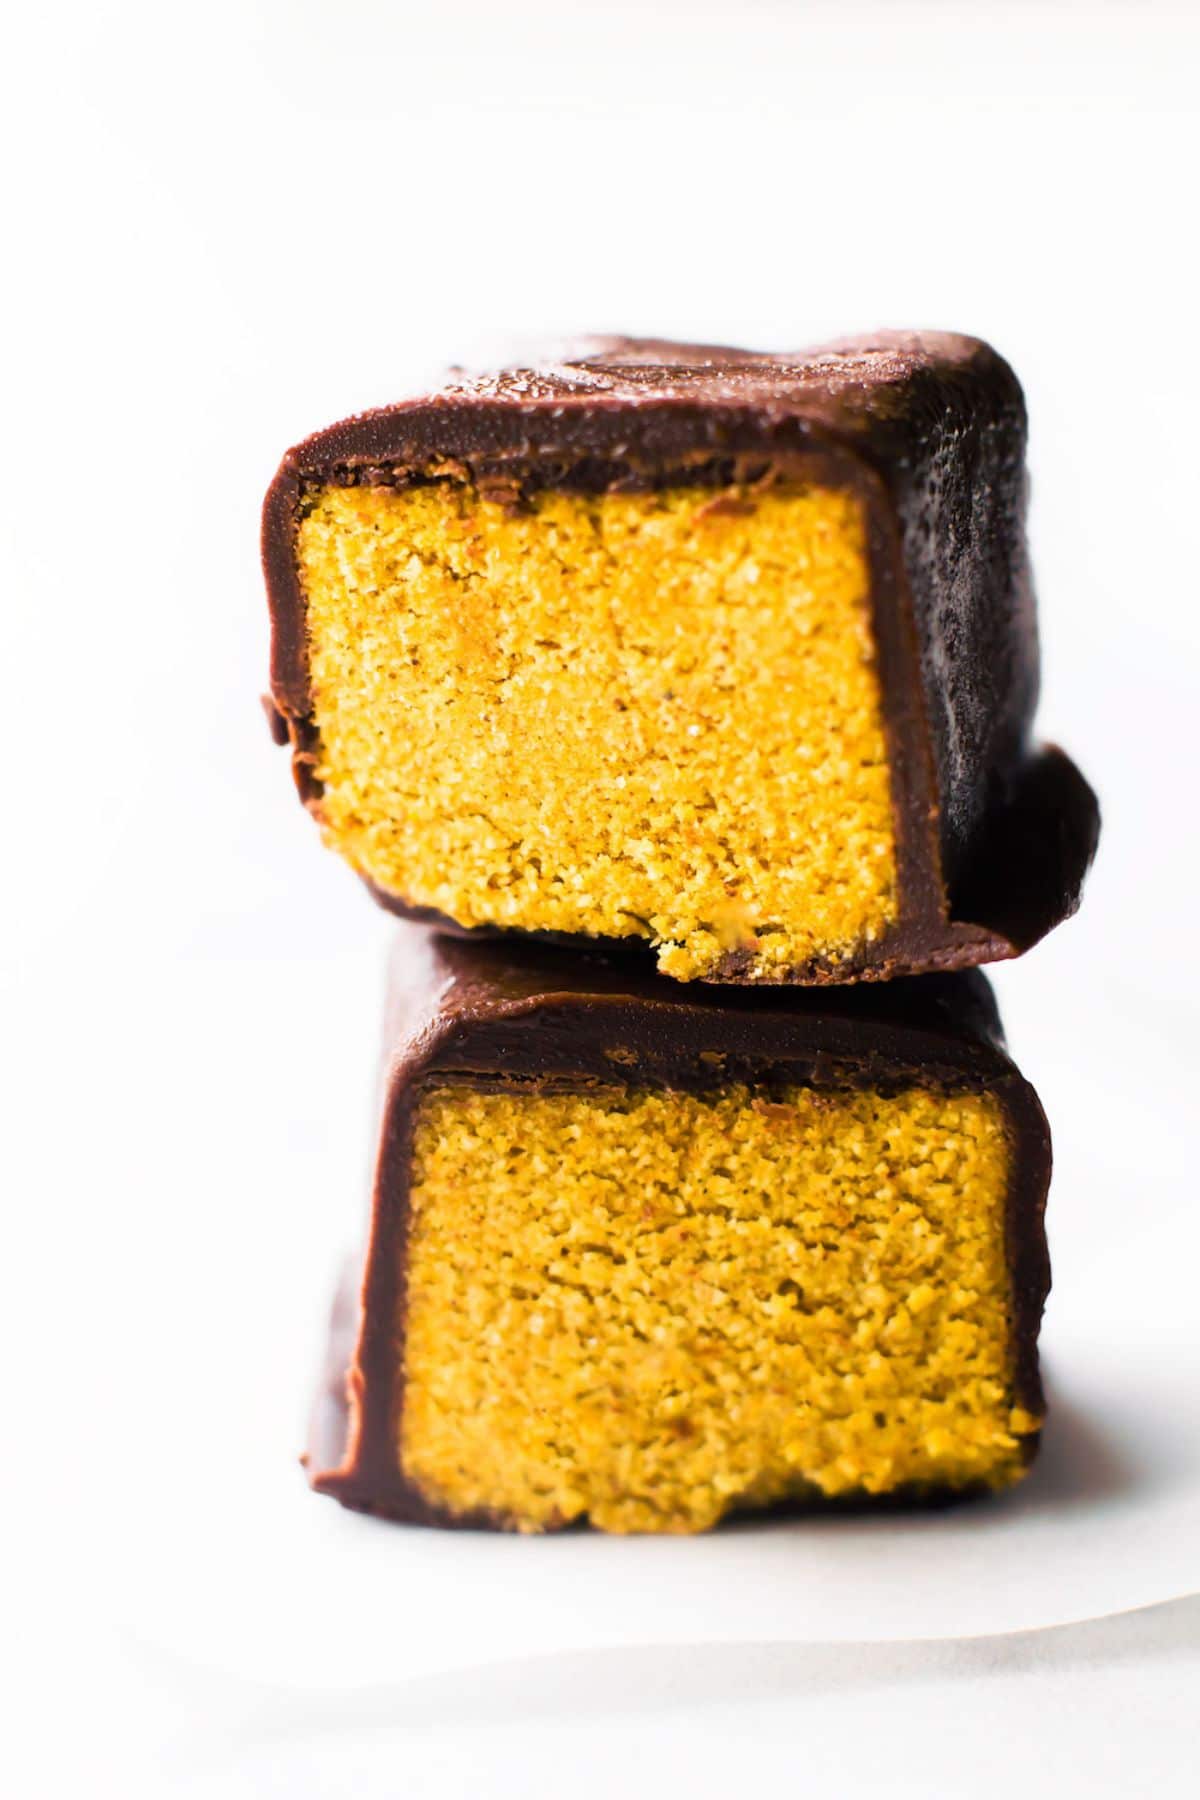 2 vegan pumpkin spice truffle bars cut in half to show their middles, sit on top of each other